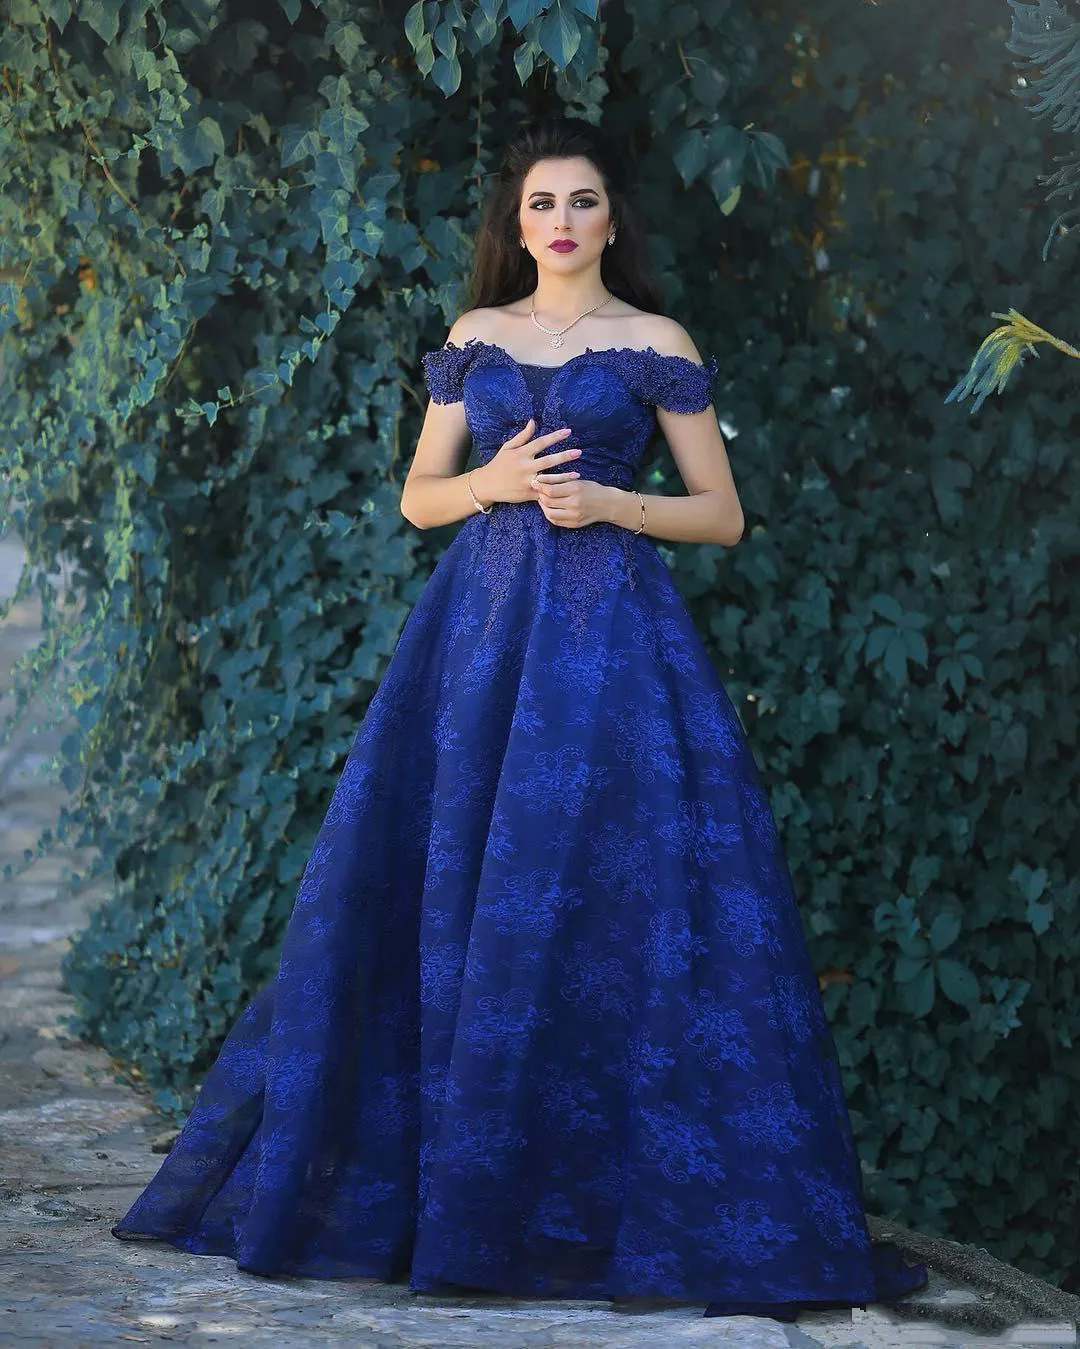 2017 Royal Blue Off Shoulder Evening Dresses Lace A-Line Prom Dresses Back Zipper Sweep Train Formal Party Gown With Applique New Arrival